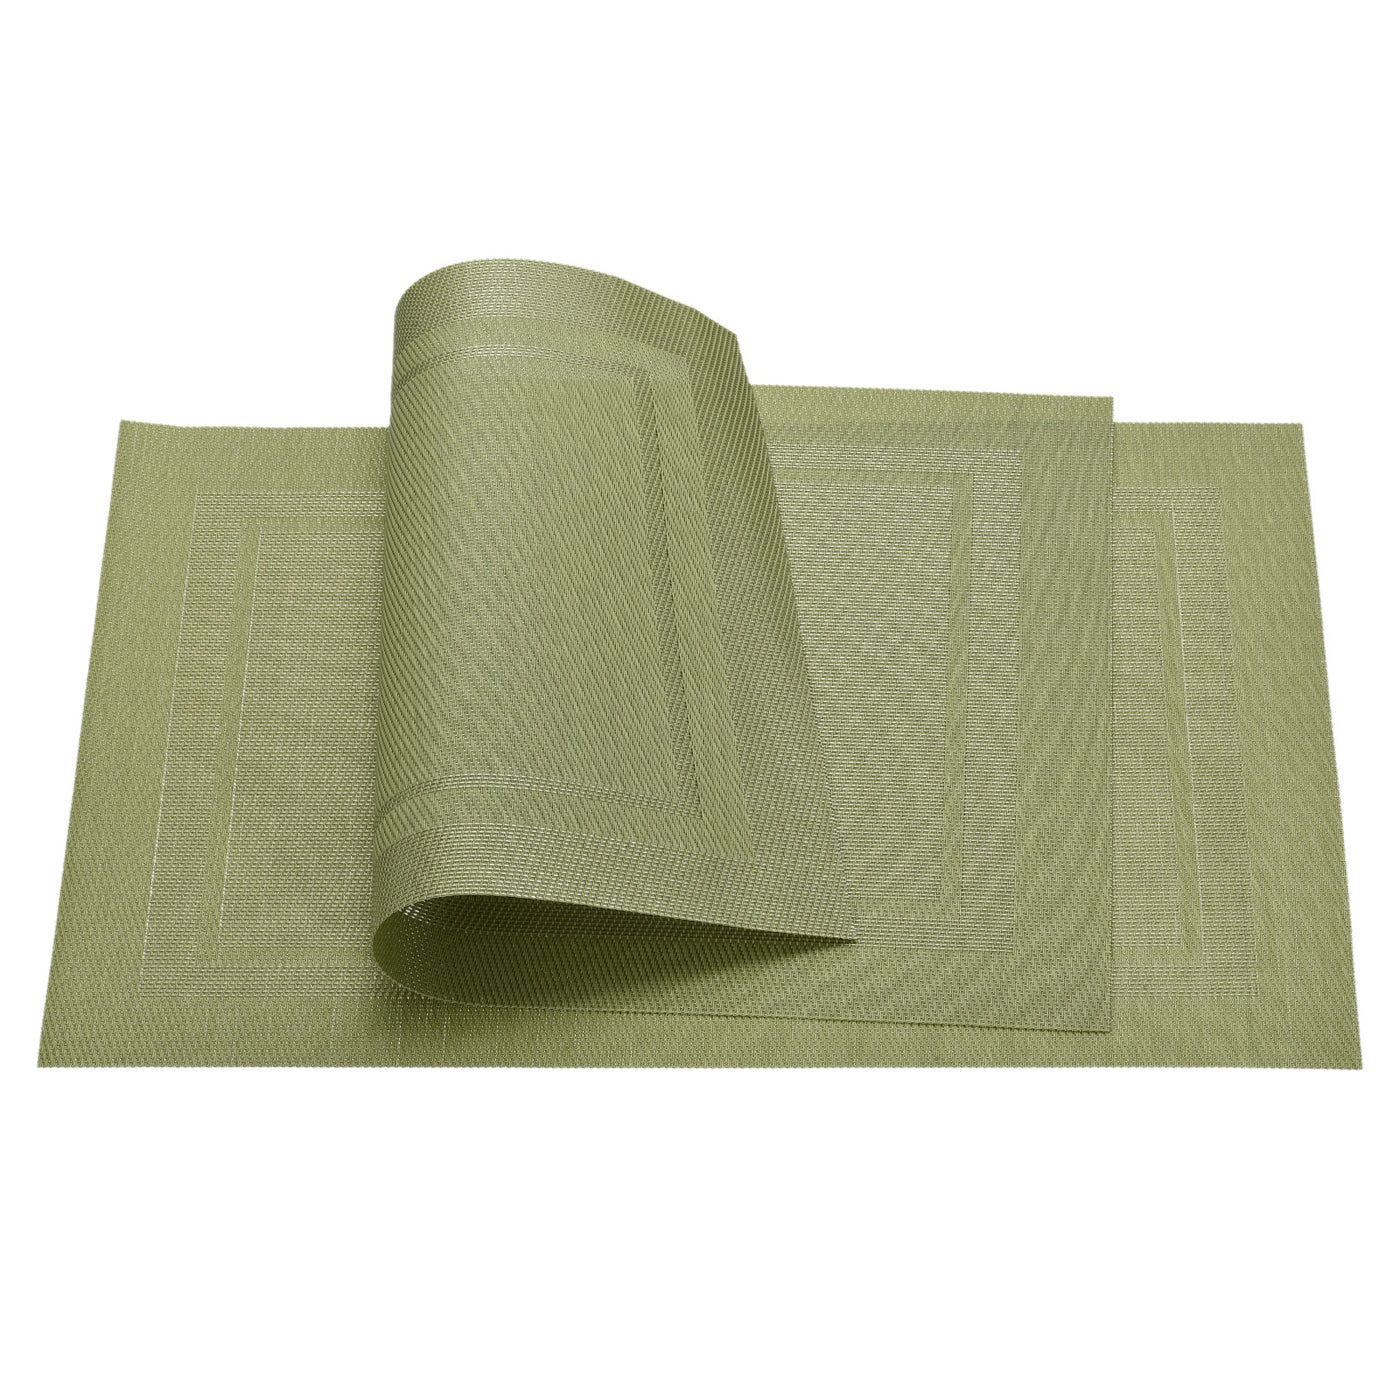 uxcell Uxcell Place Mats 450x300mm 2pcs PVC Table Washable Woven Placemat, Green